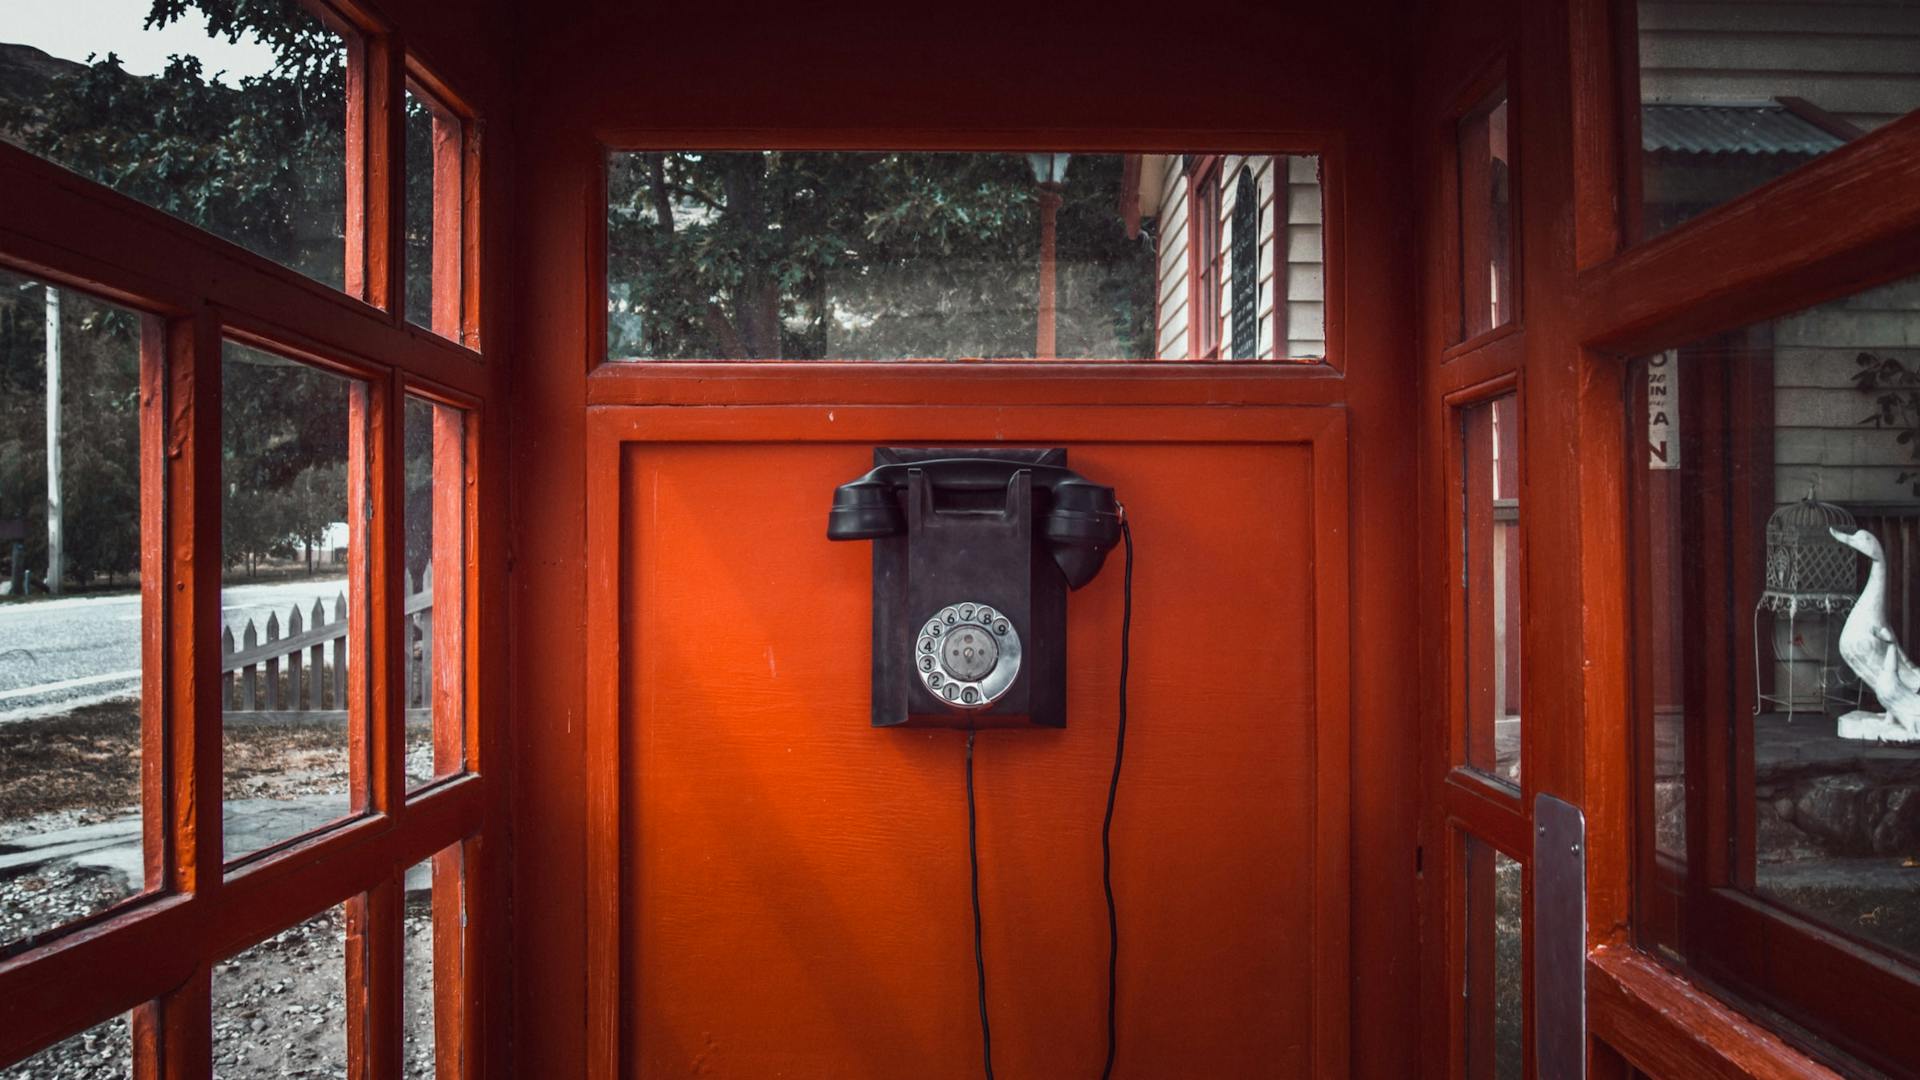 payphone in a red booth